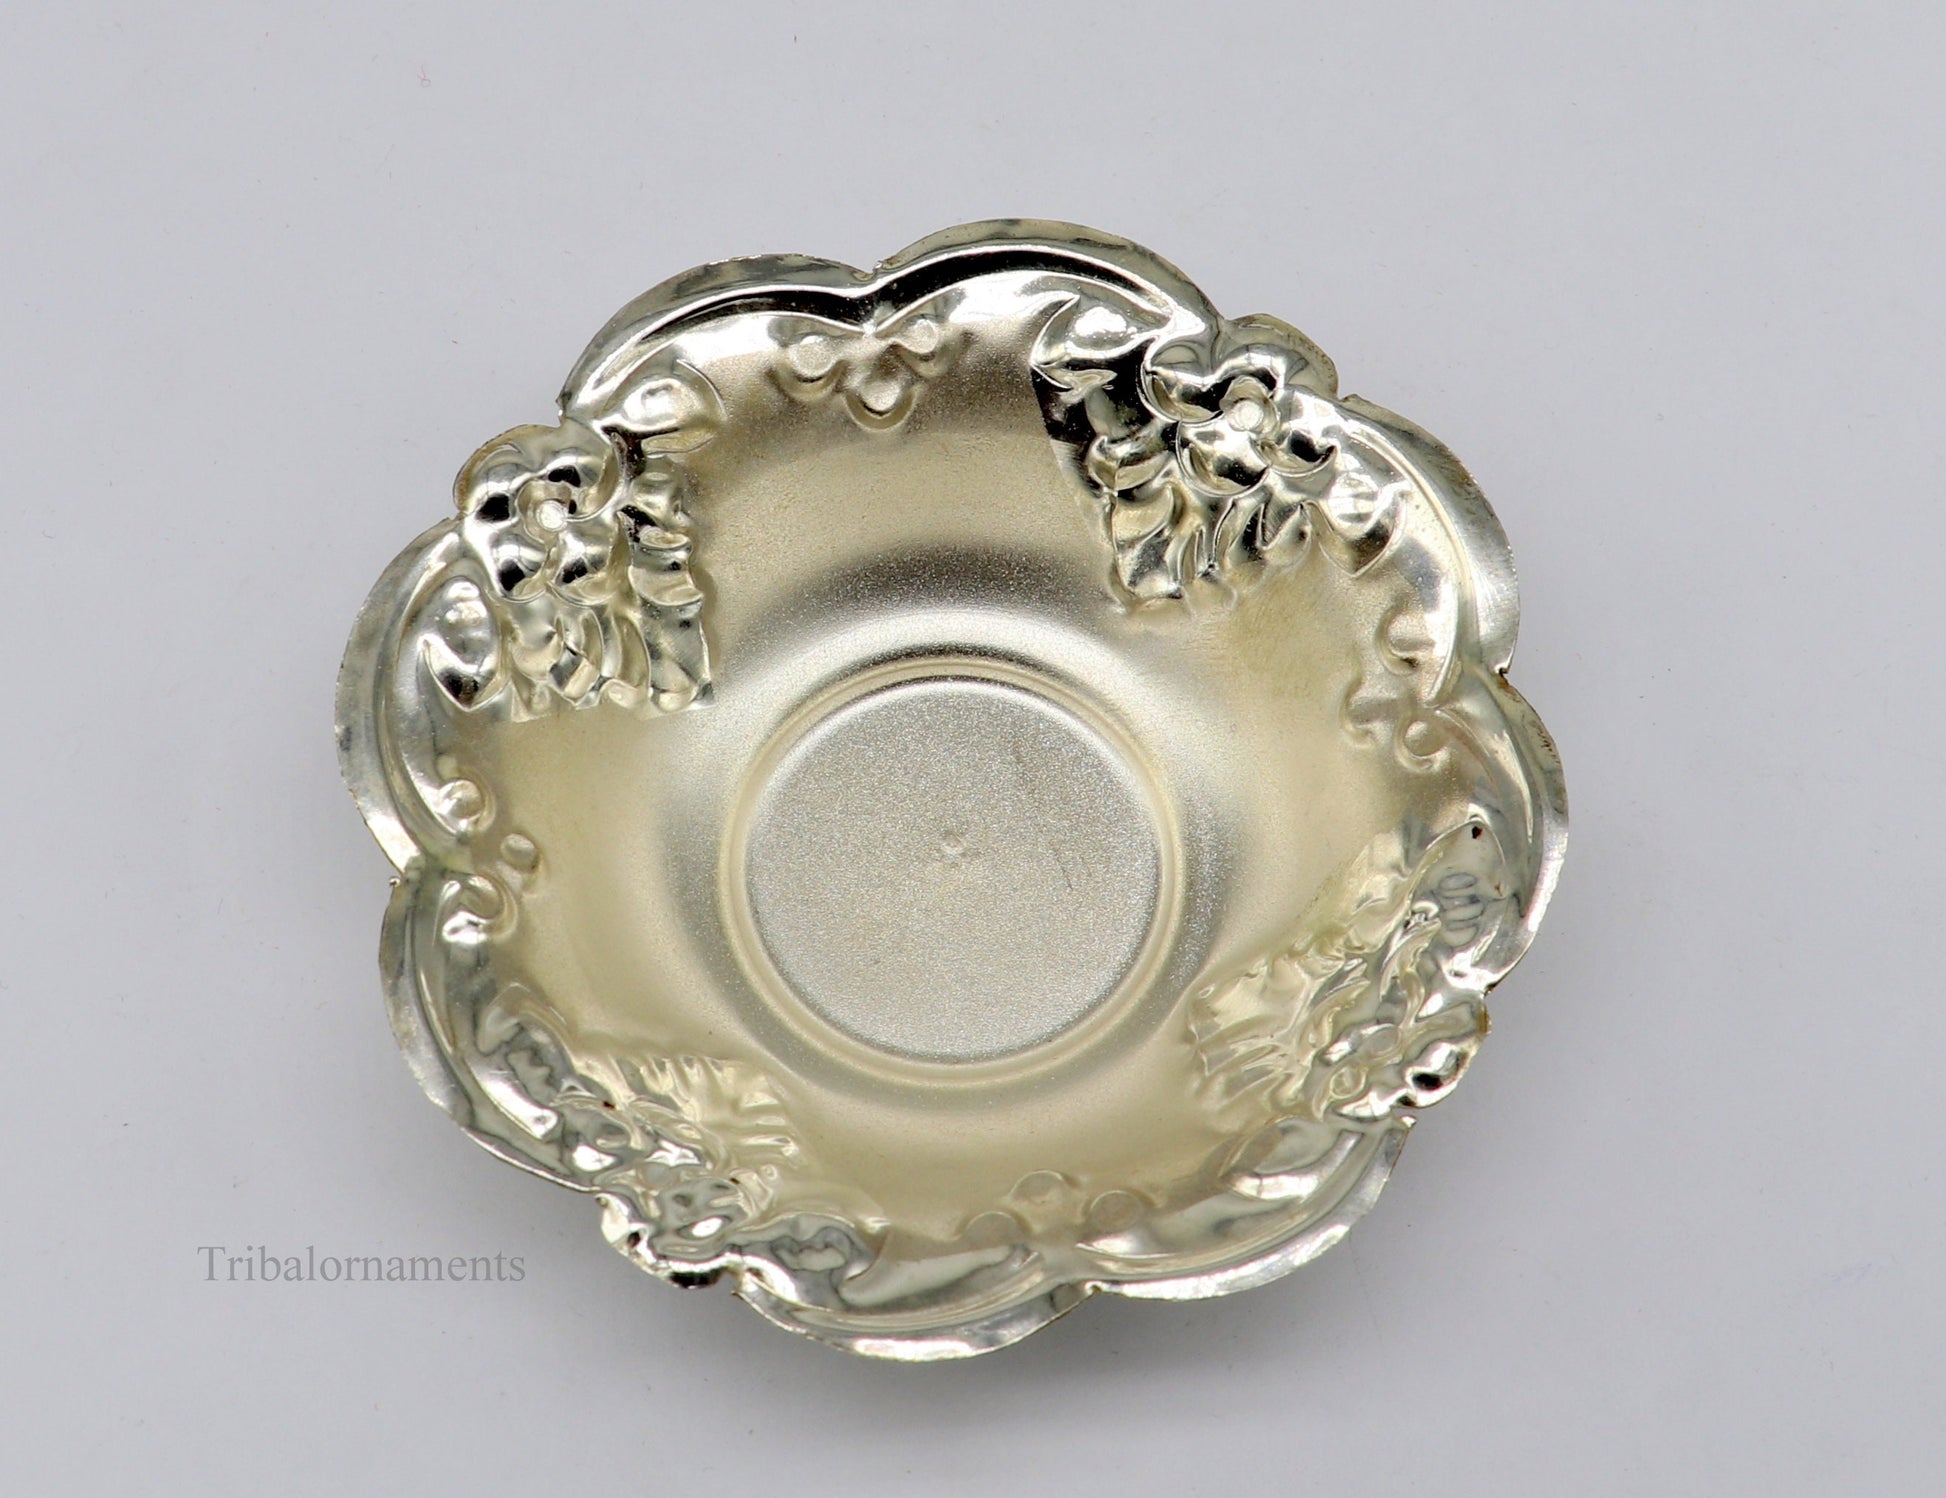 925 sterling silver exclusive handcrafted work light weight bowl, puja utensils, silver article, silver utensils, silver vessel sv237 - TRIBAL ORNAMENTS